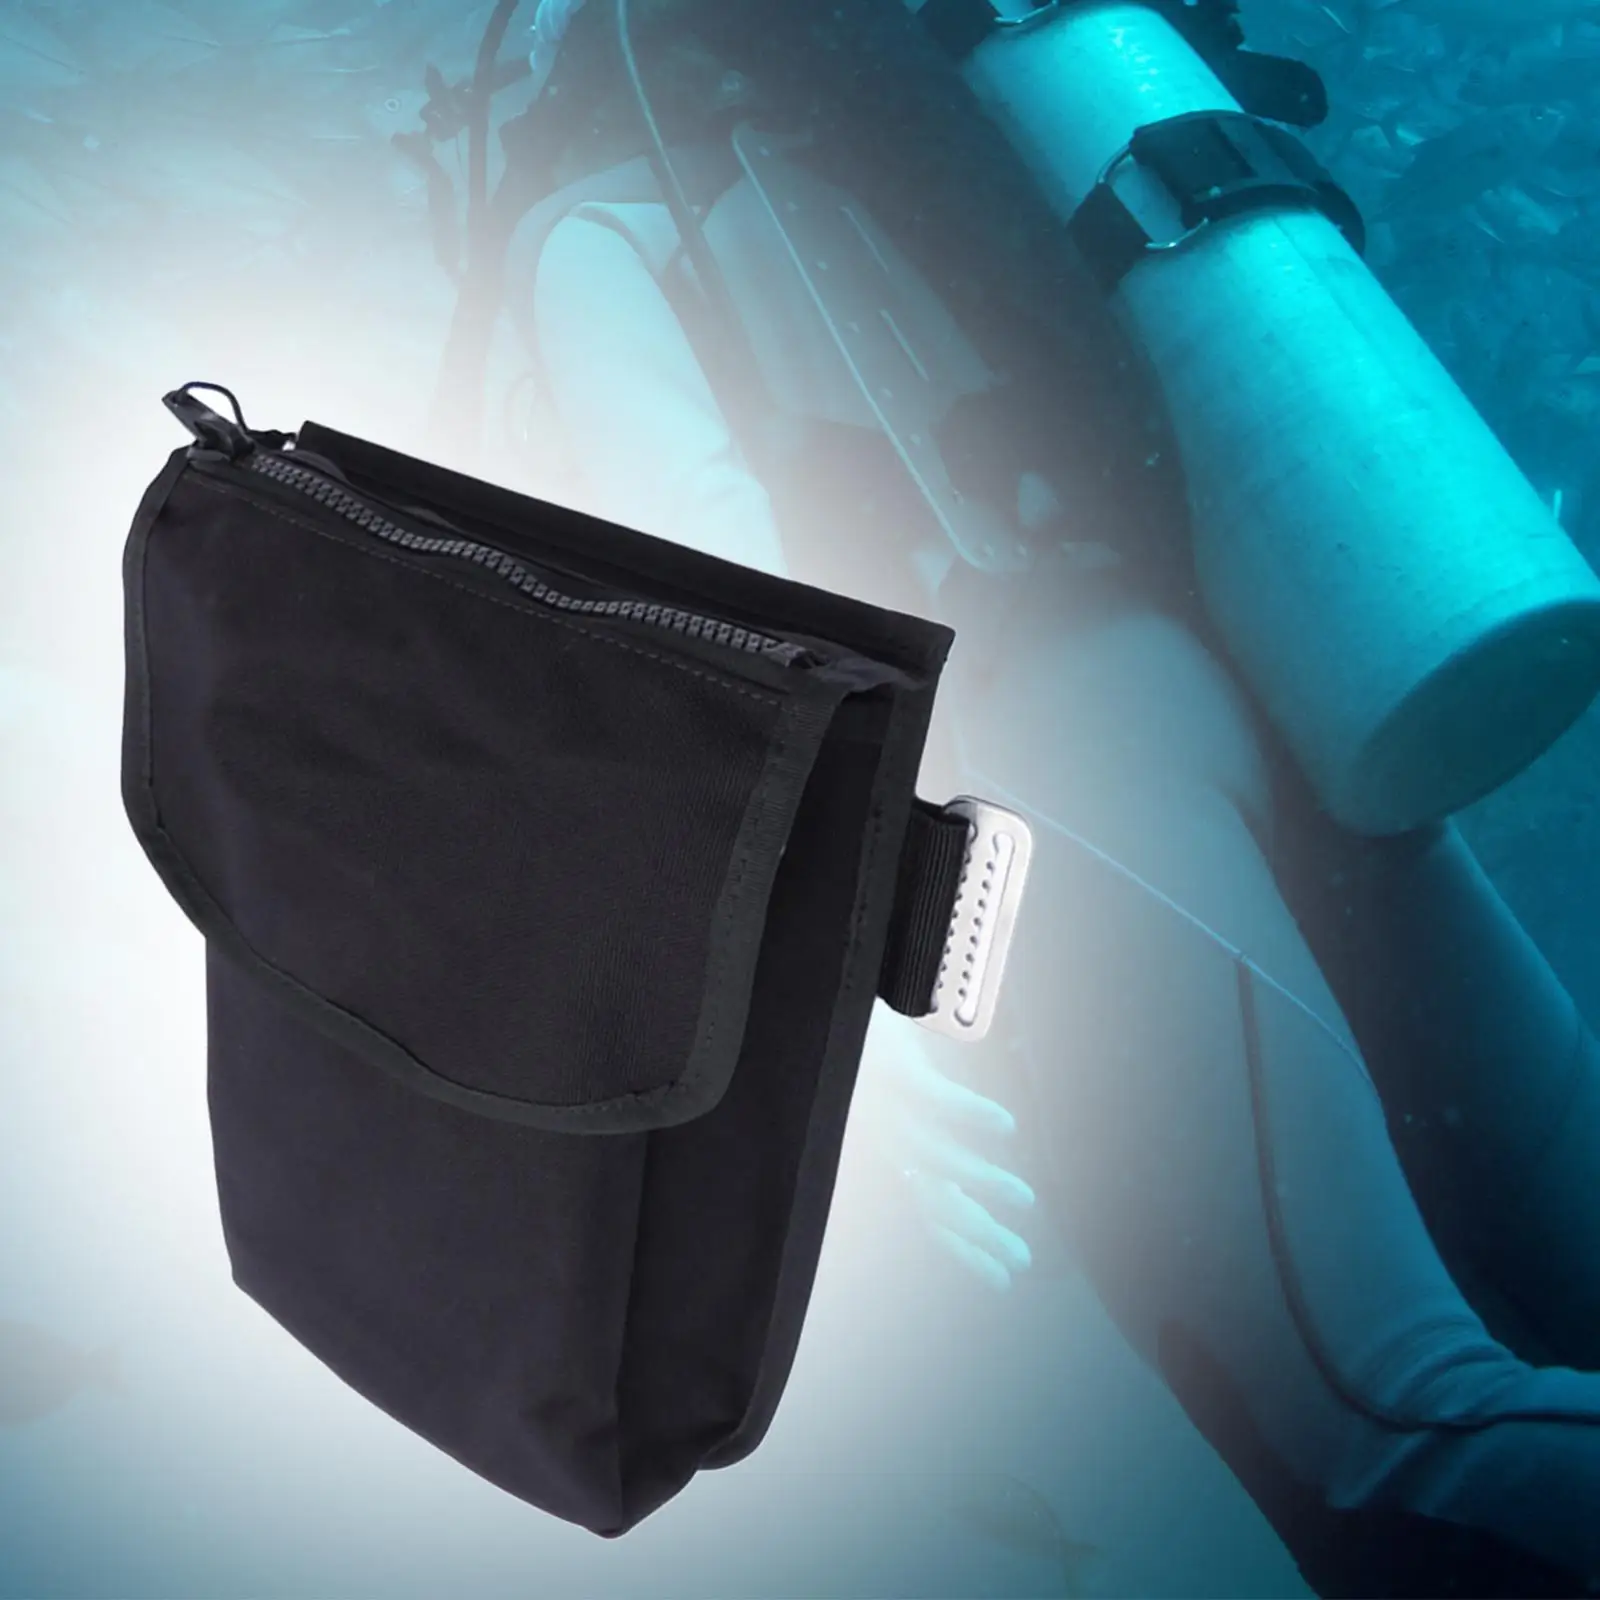 Scuba Diving Thigh Pocket Storage Pocket Technical Diving Storage Bag for Underwater Swimming Snorkeling Water Sports Black